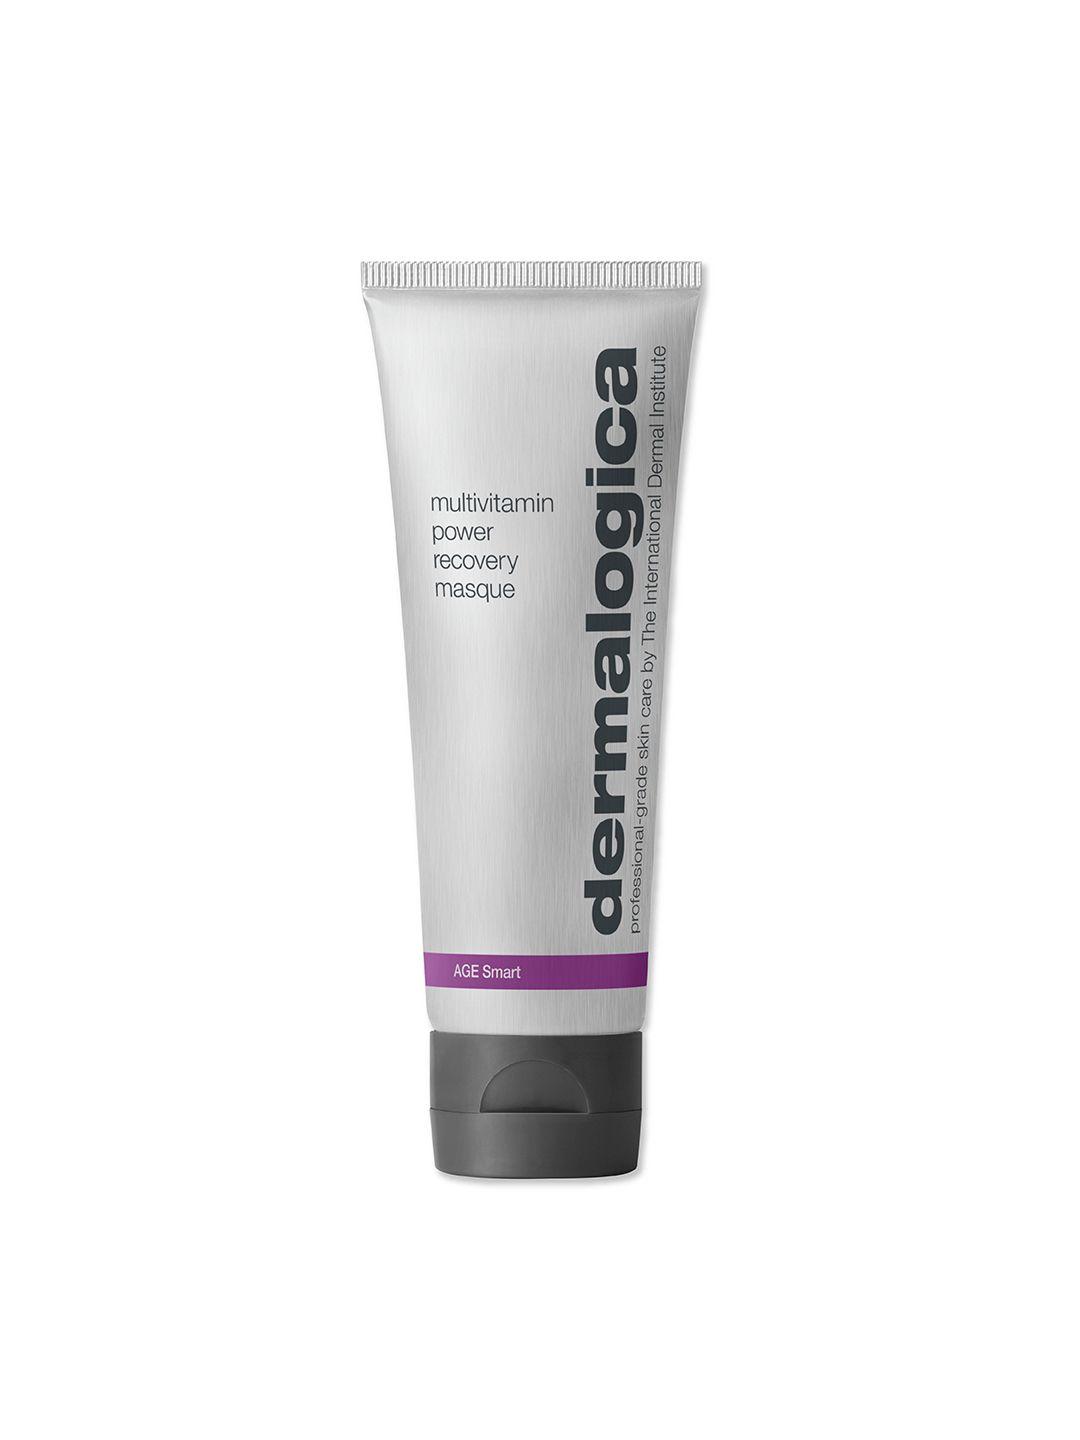 dermalogica multivitamin power recovery masque with vitamin a & c - 15 ml